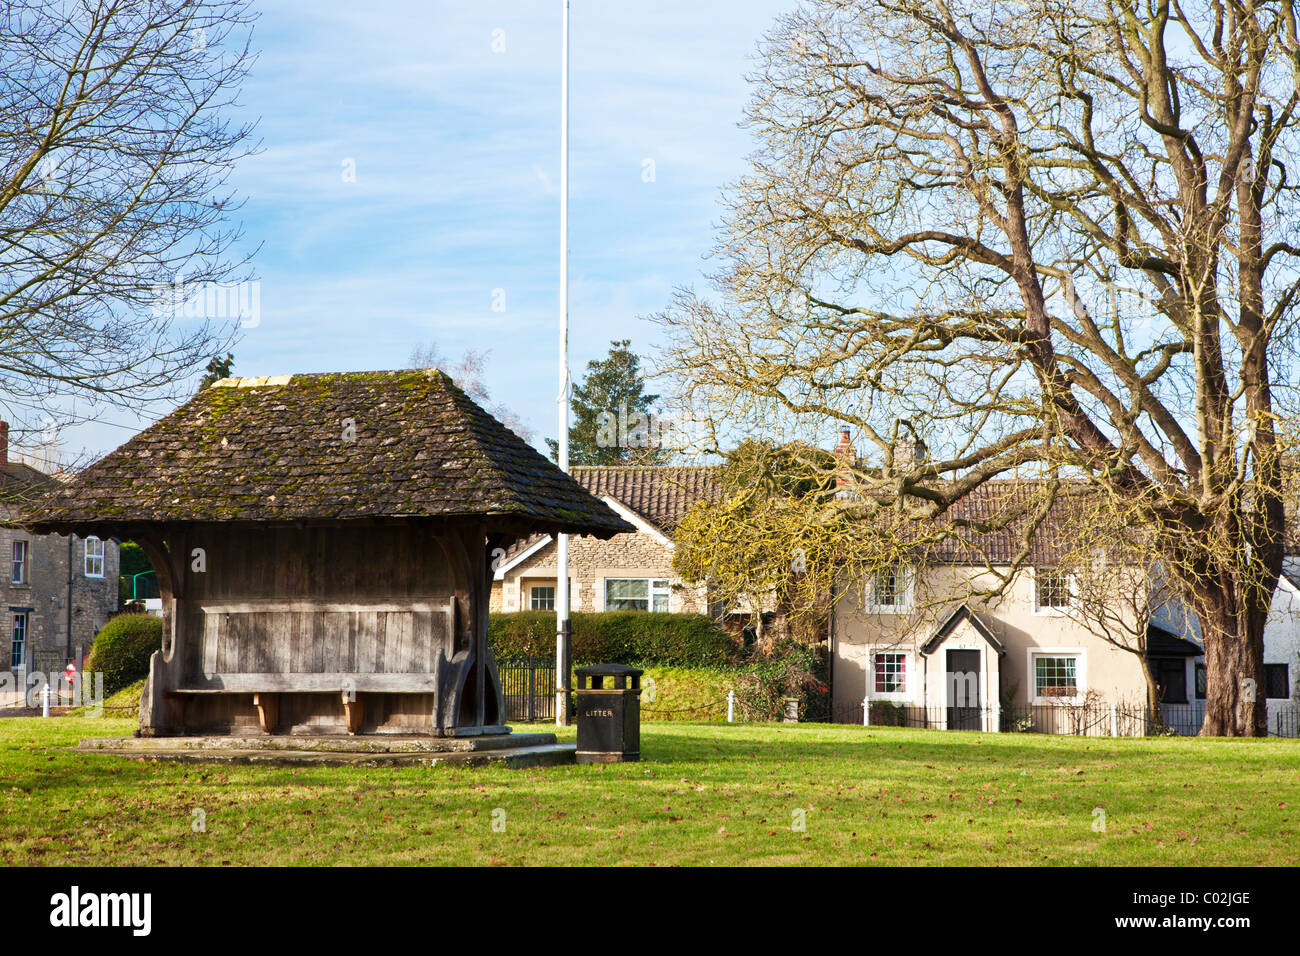 The village green, known as Ham Green, with flagpole and bench, in the village of Holt, Wiltshire, England, UK Stock Photo